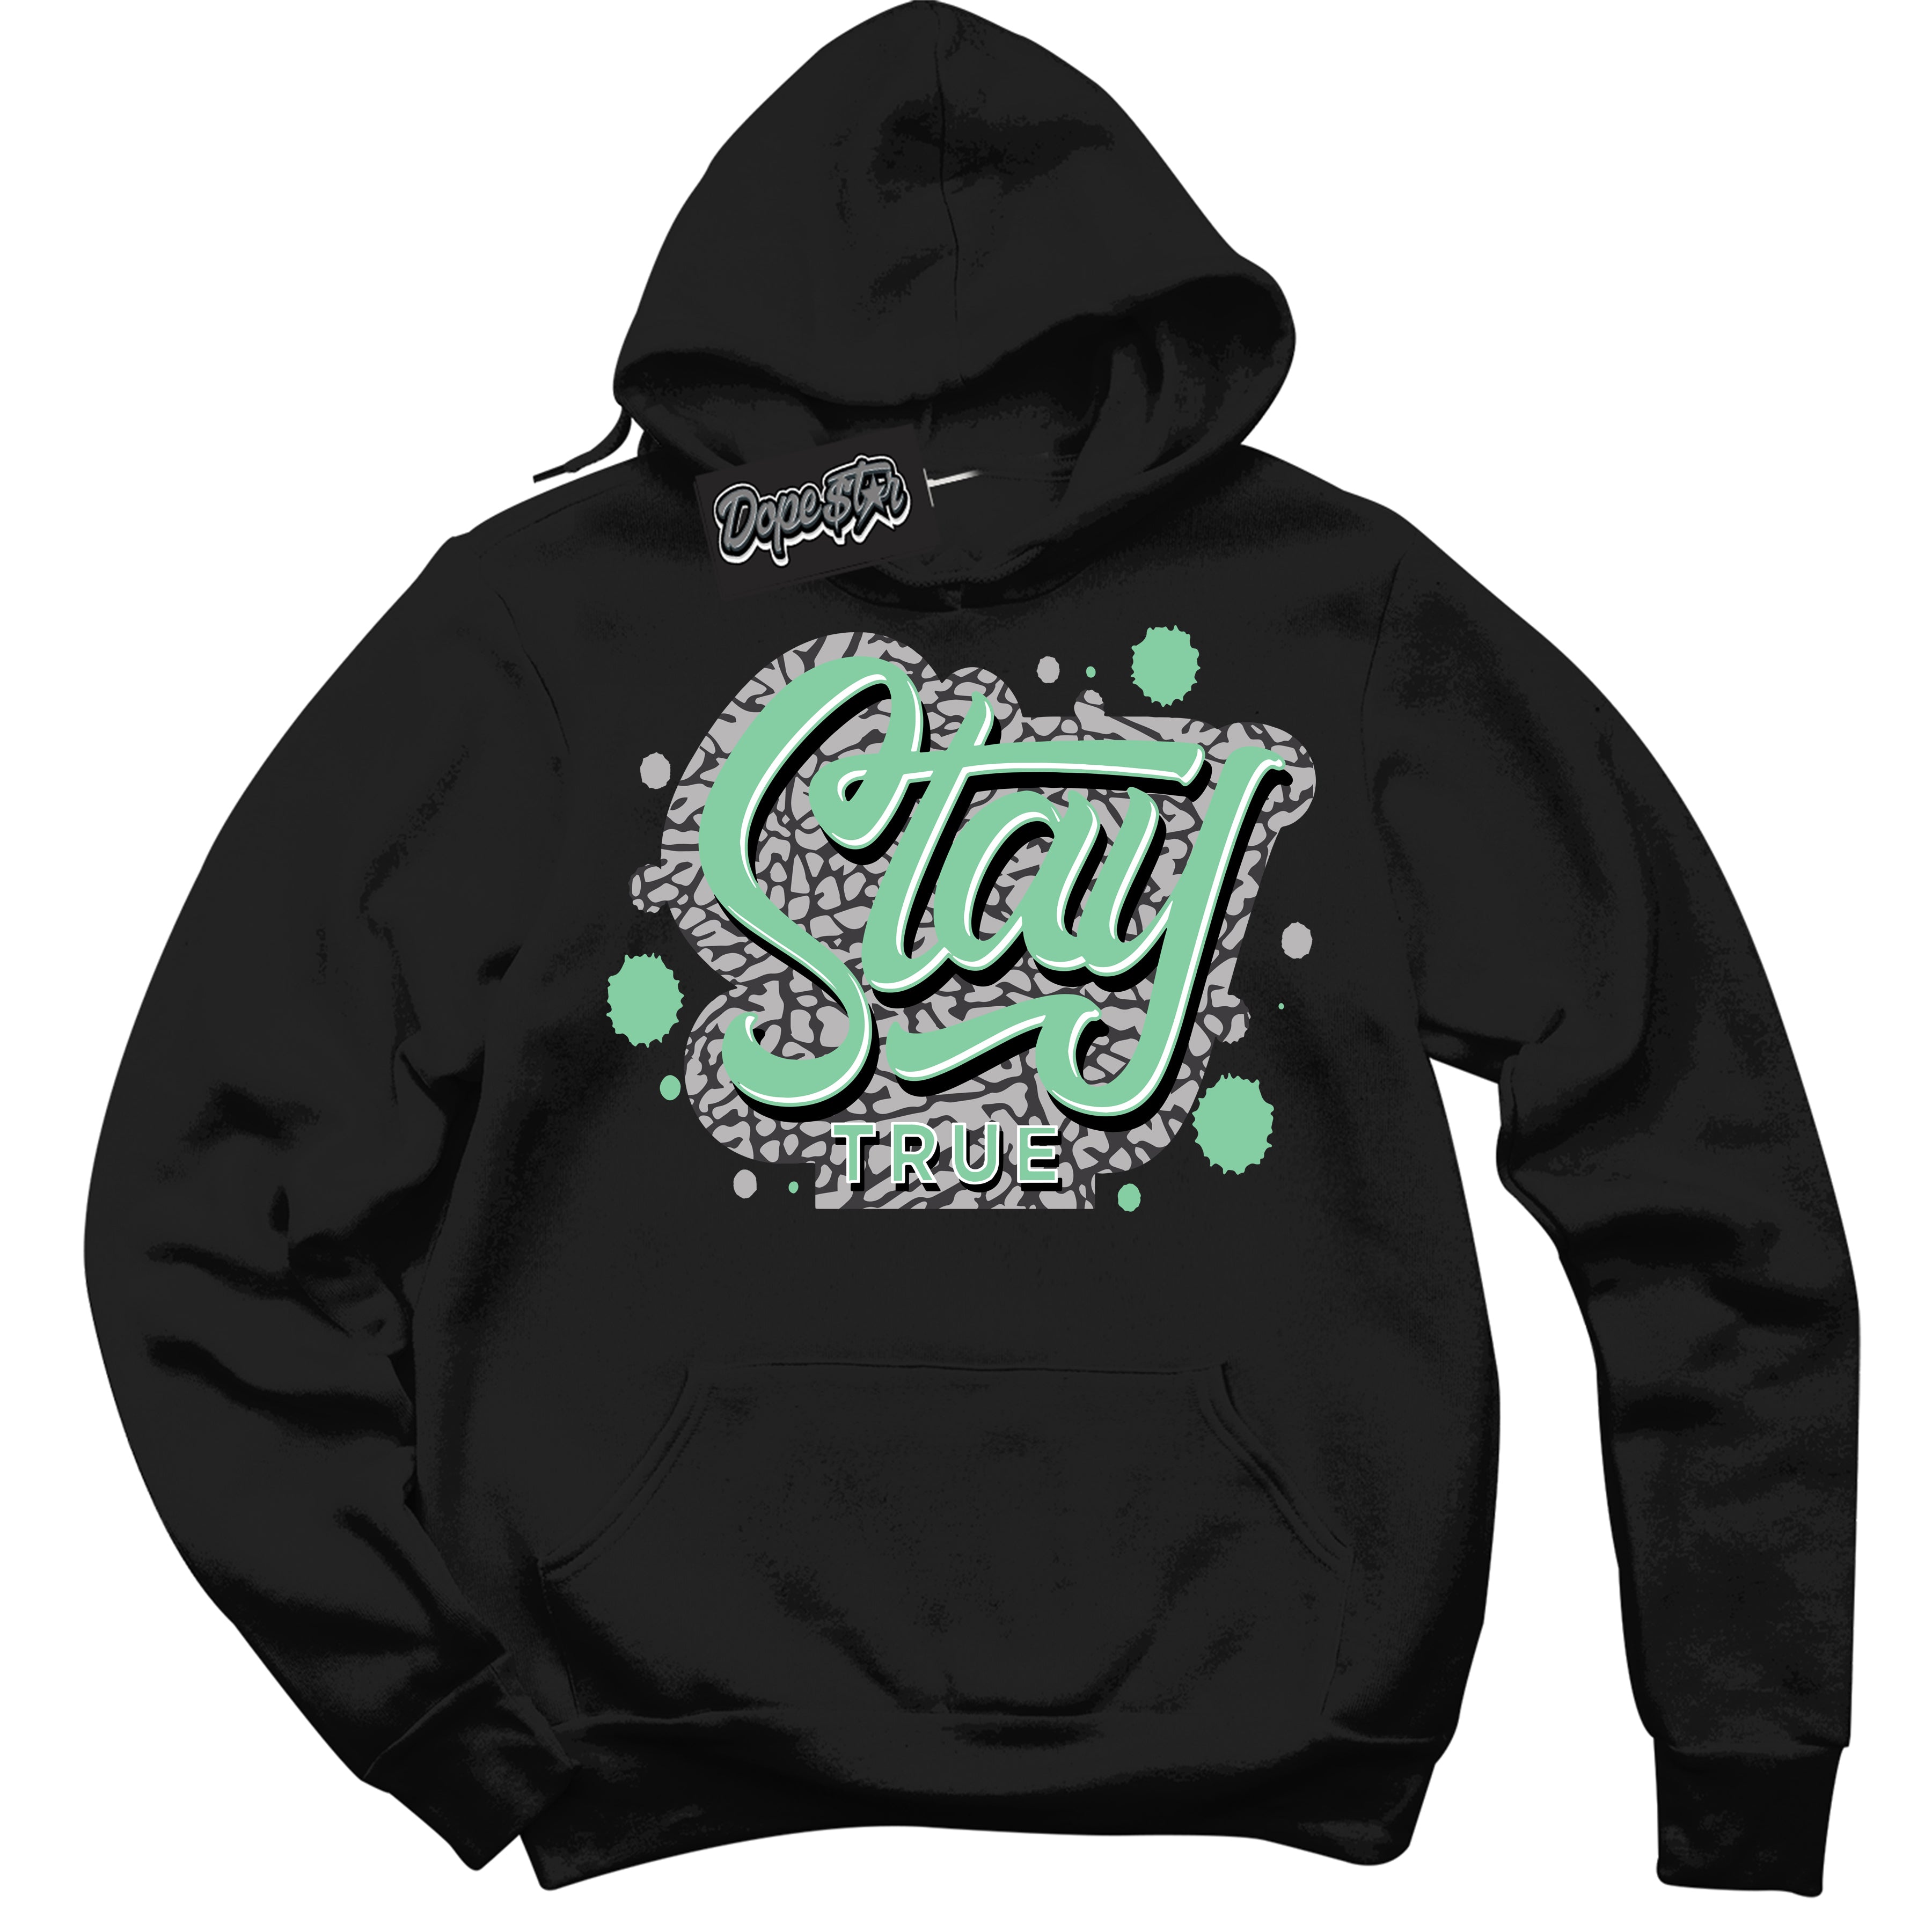 Cool Black Graphic DopeStar Hoodie with “ Stay True “ print, that perfectly matches Green Glow 3S sneakers